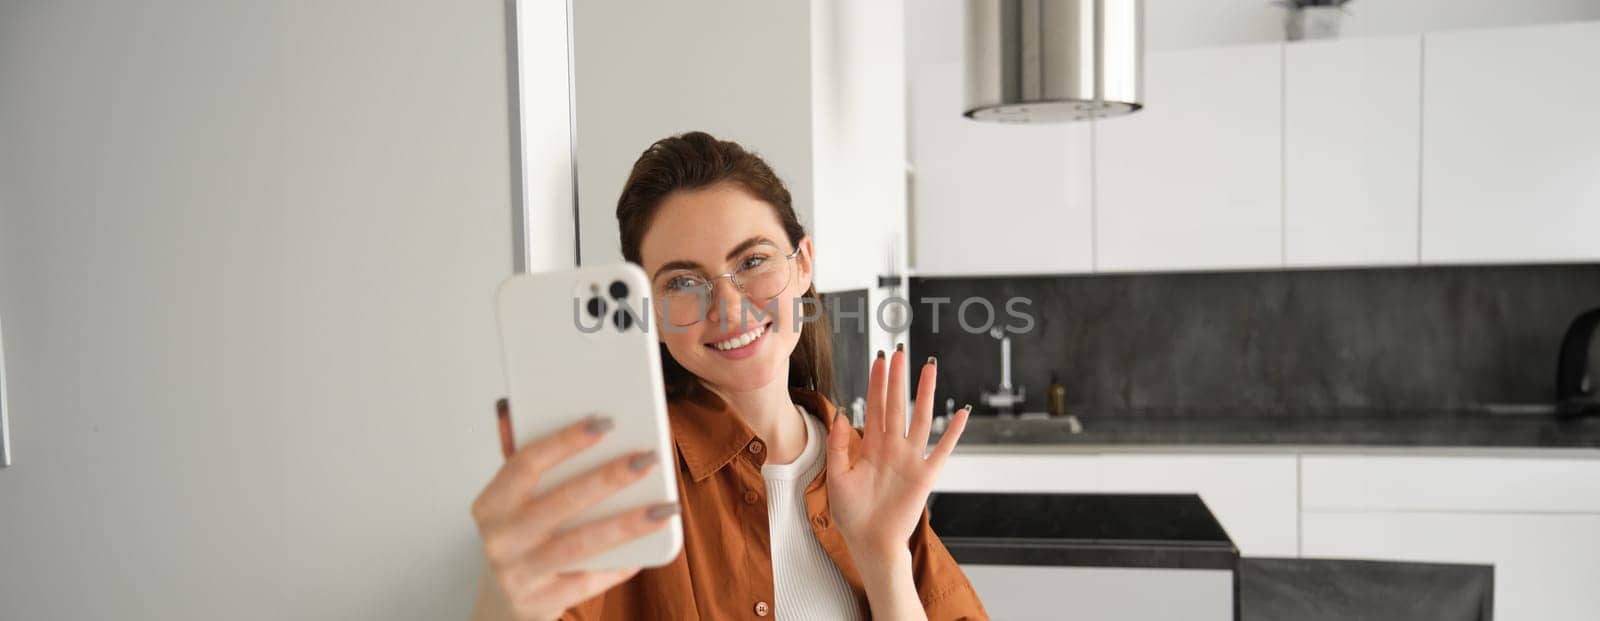 Portrait of smiling young woman standing with mobile phone at home, waving hand at smartphone, connects to online chat, talking to someone.